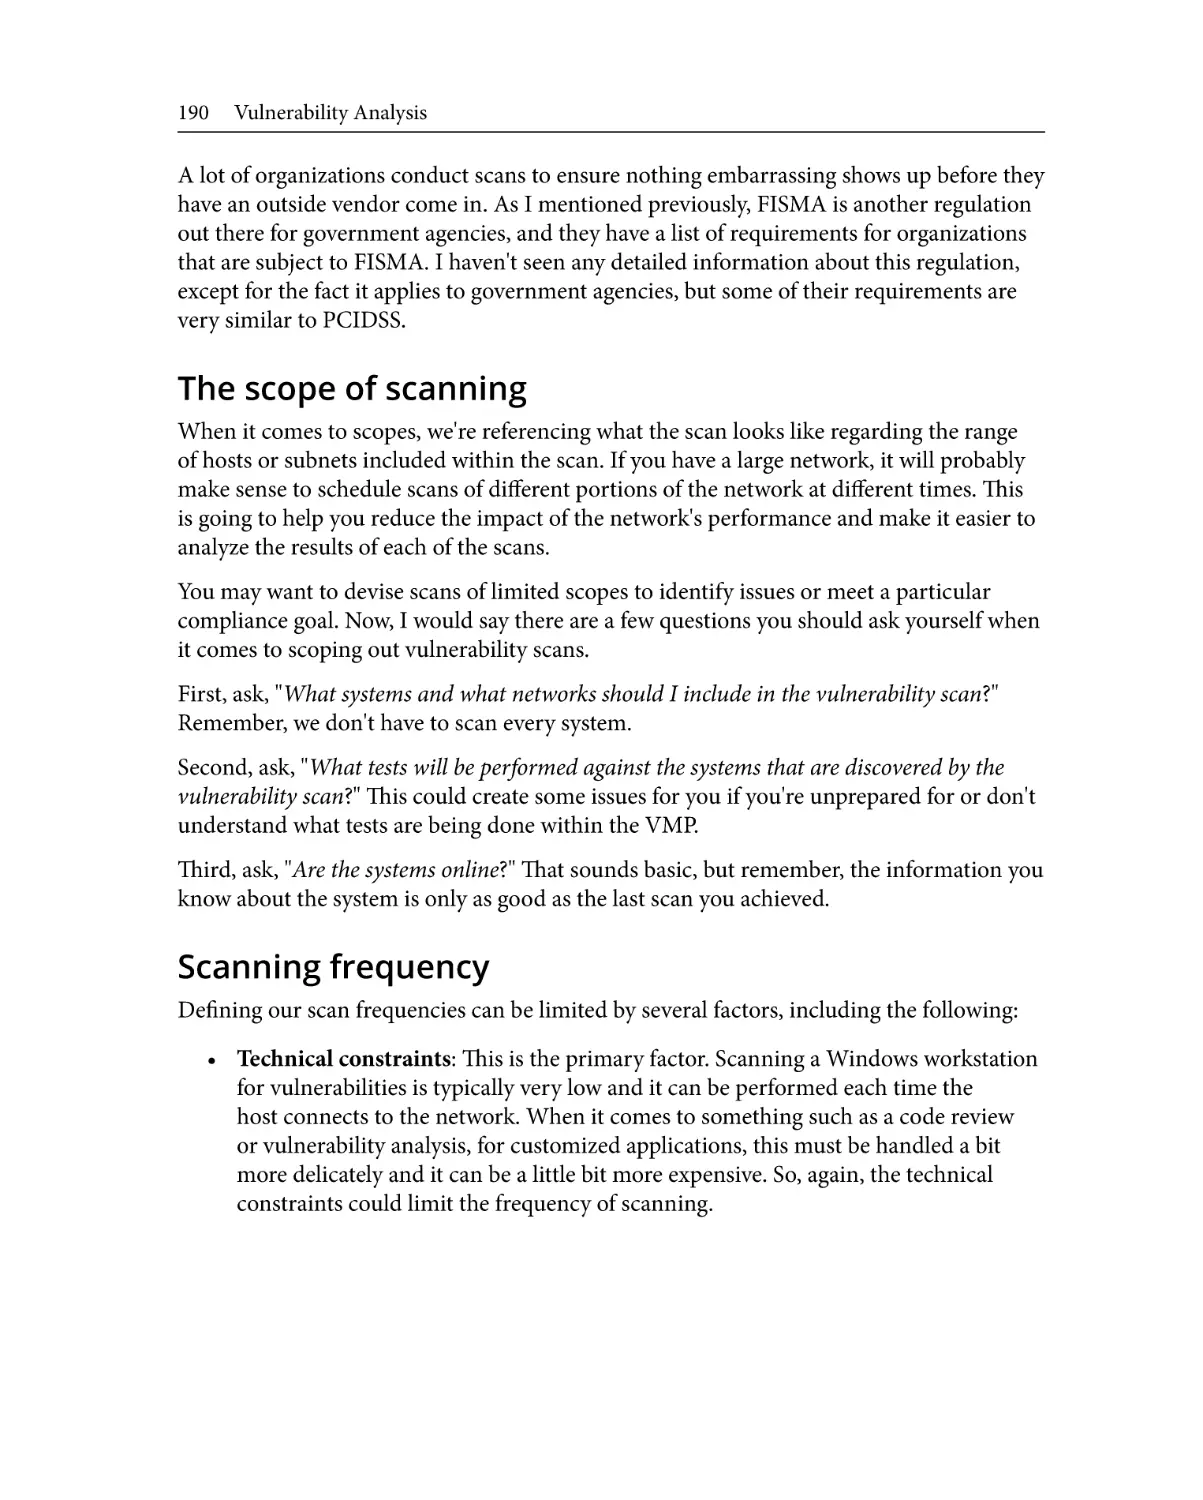 The scope of scanning
Scanning frequency